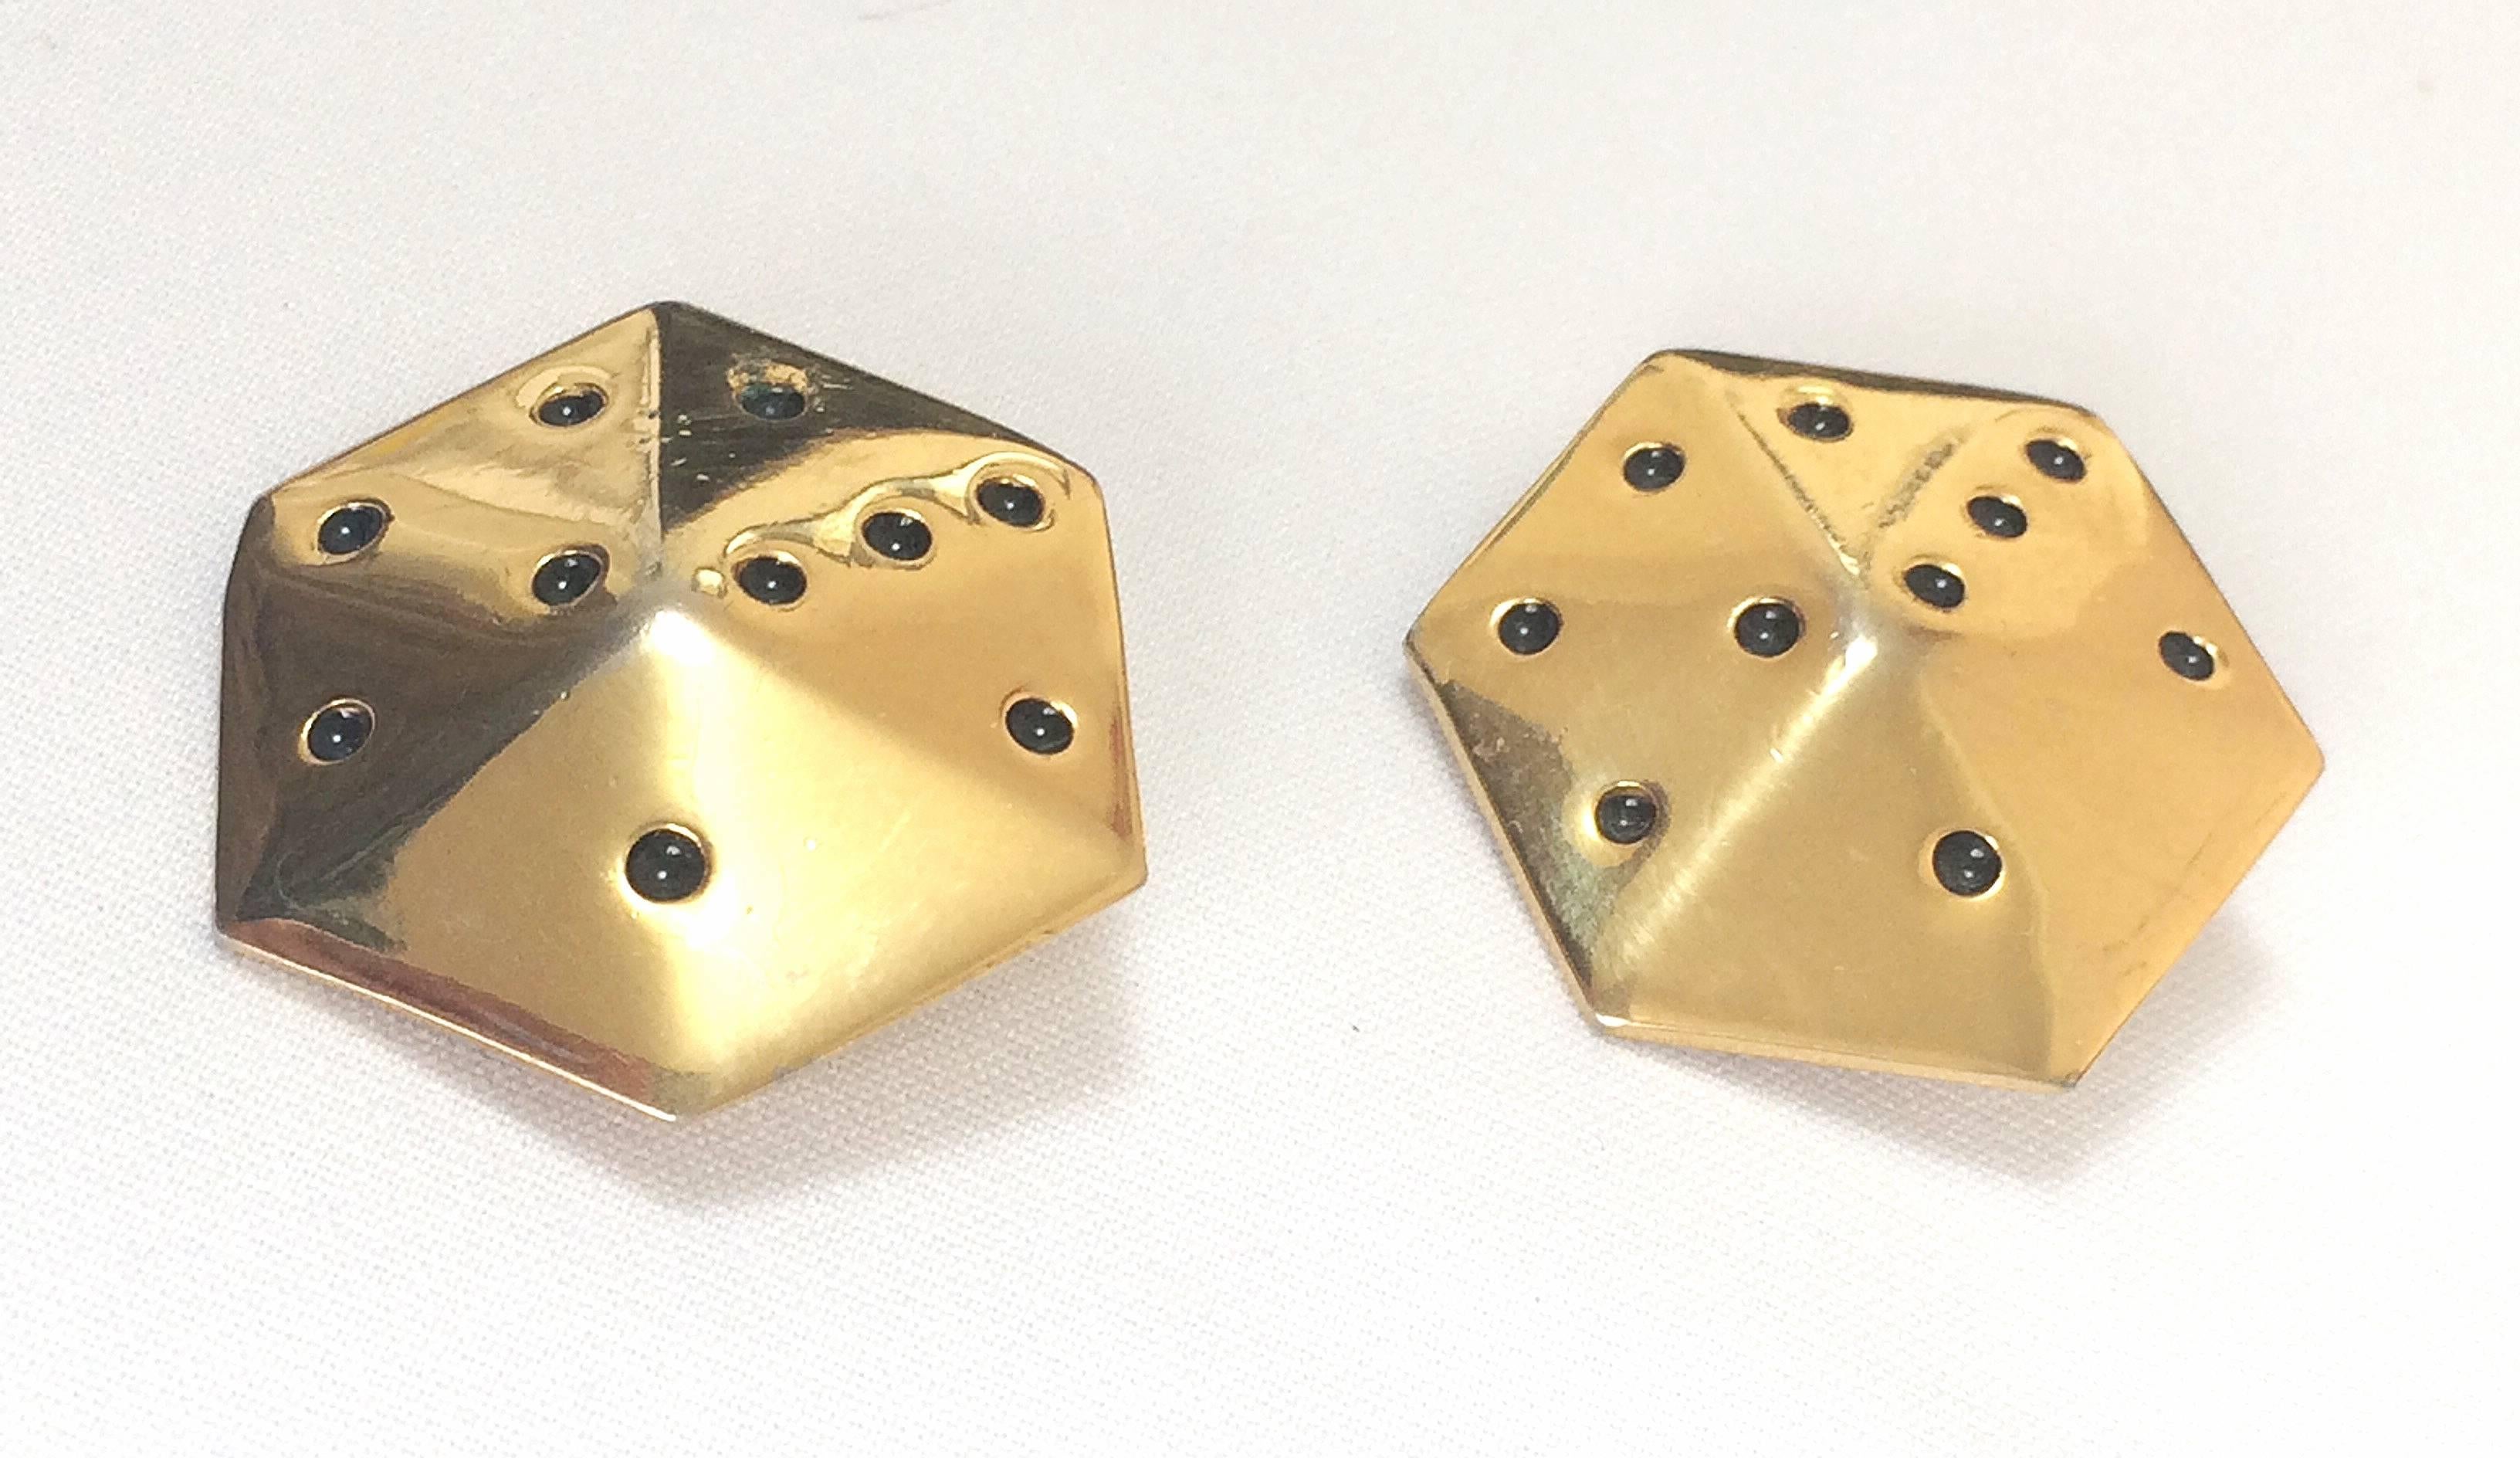 1990s. Vintage ESCADA golden dice cube design earrings. Perfect vintage jewelry gift.

1990s. Vintage ESCADA golden dice cube design earrings. Perfect vintage jewelry gift.
Fun design in dice!
Classic simplicity that would never go out of